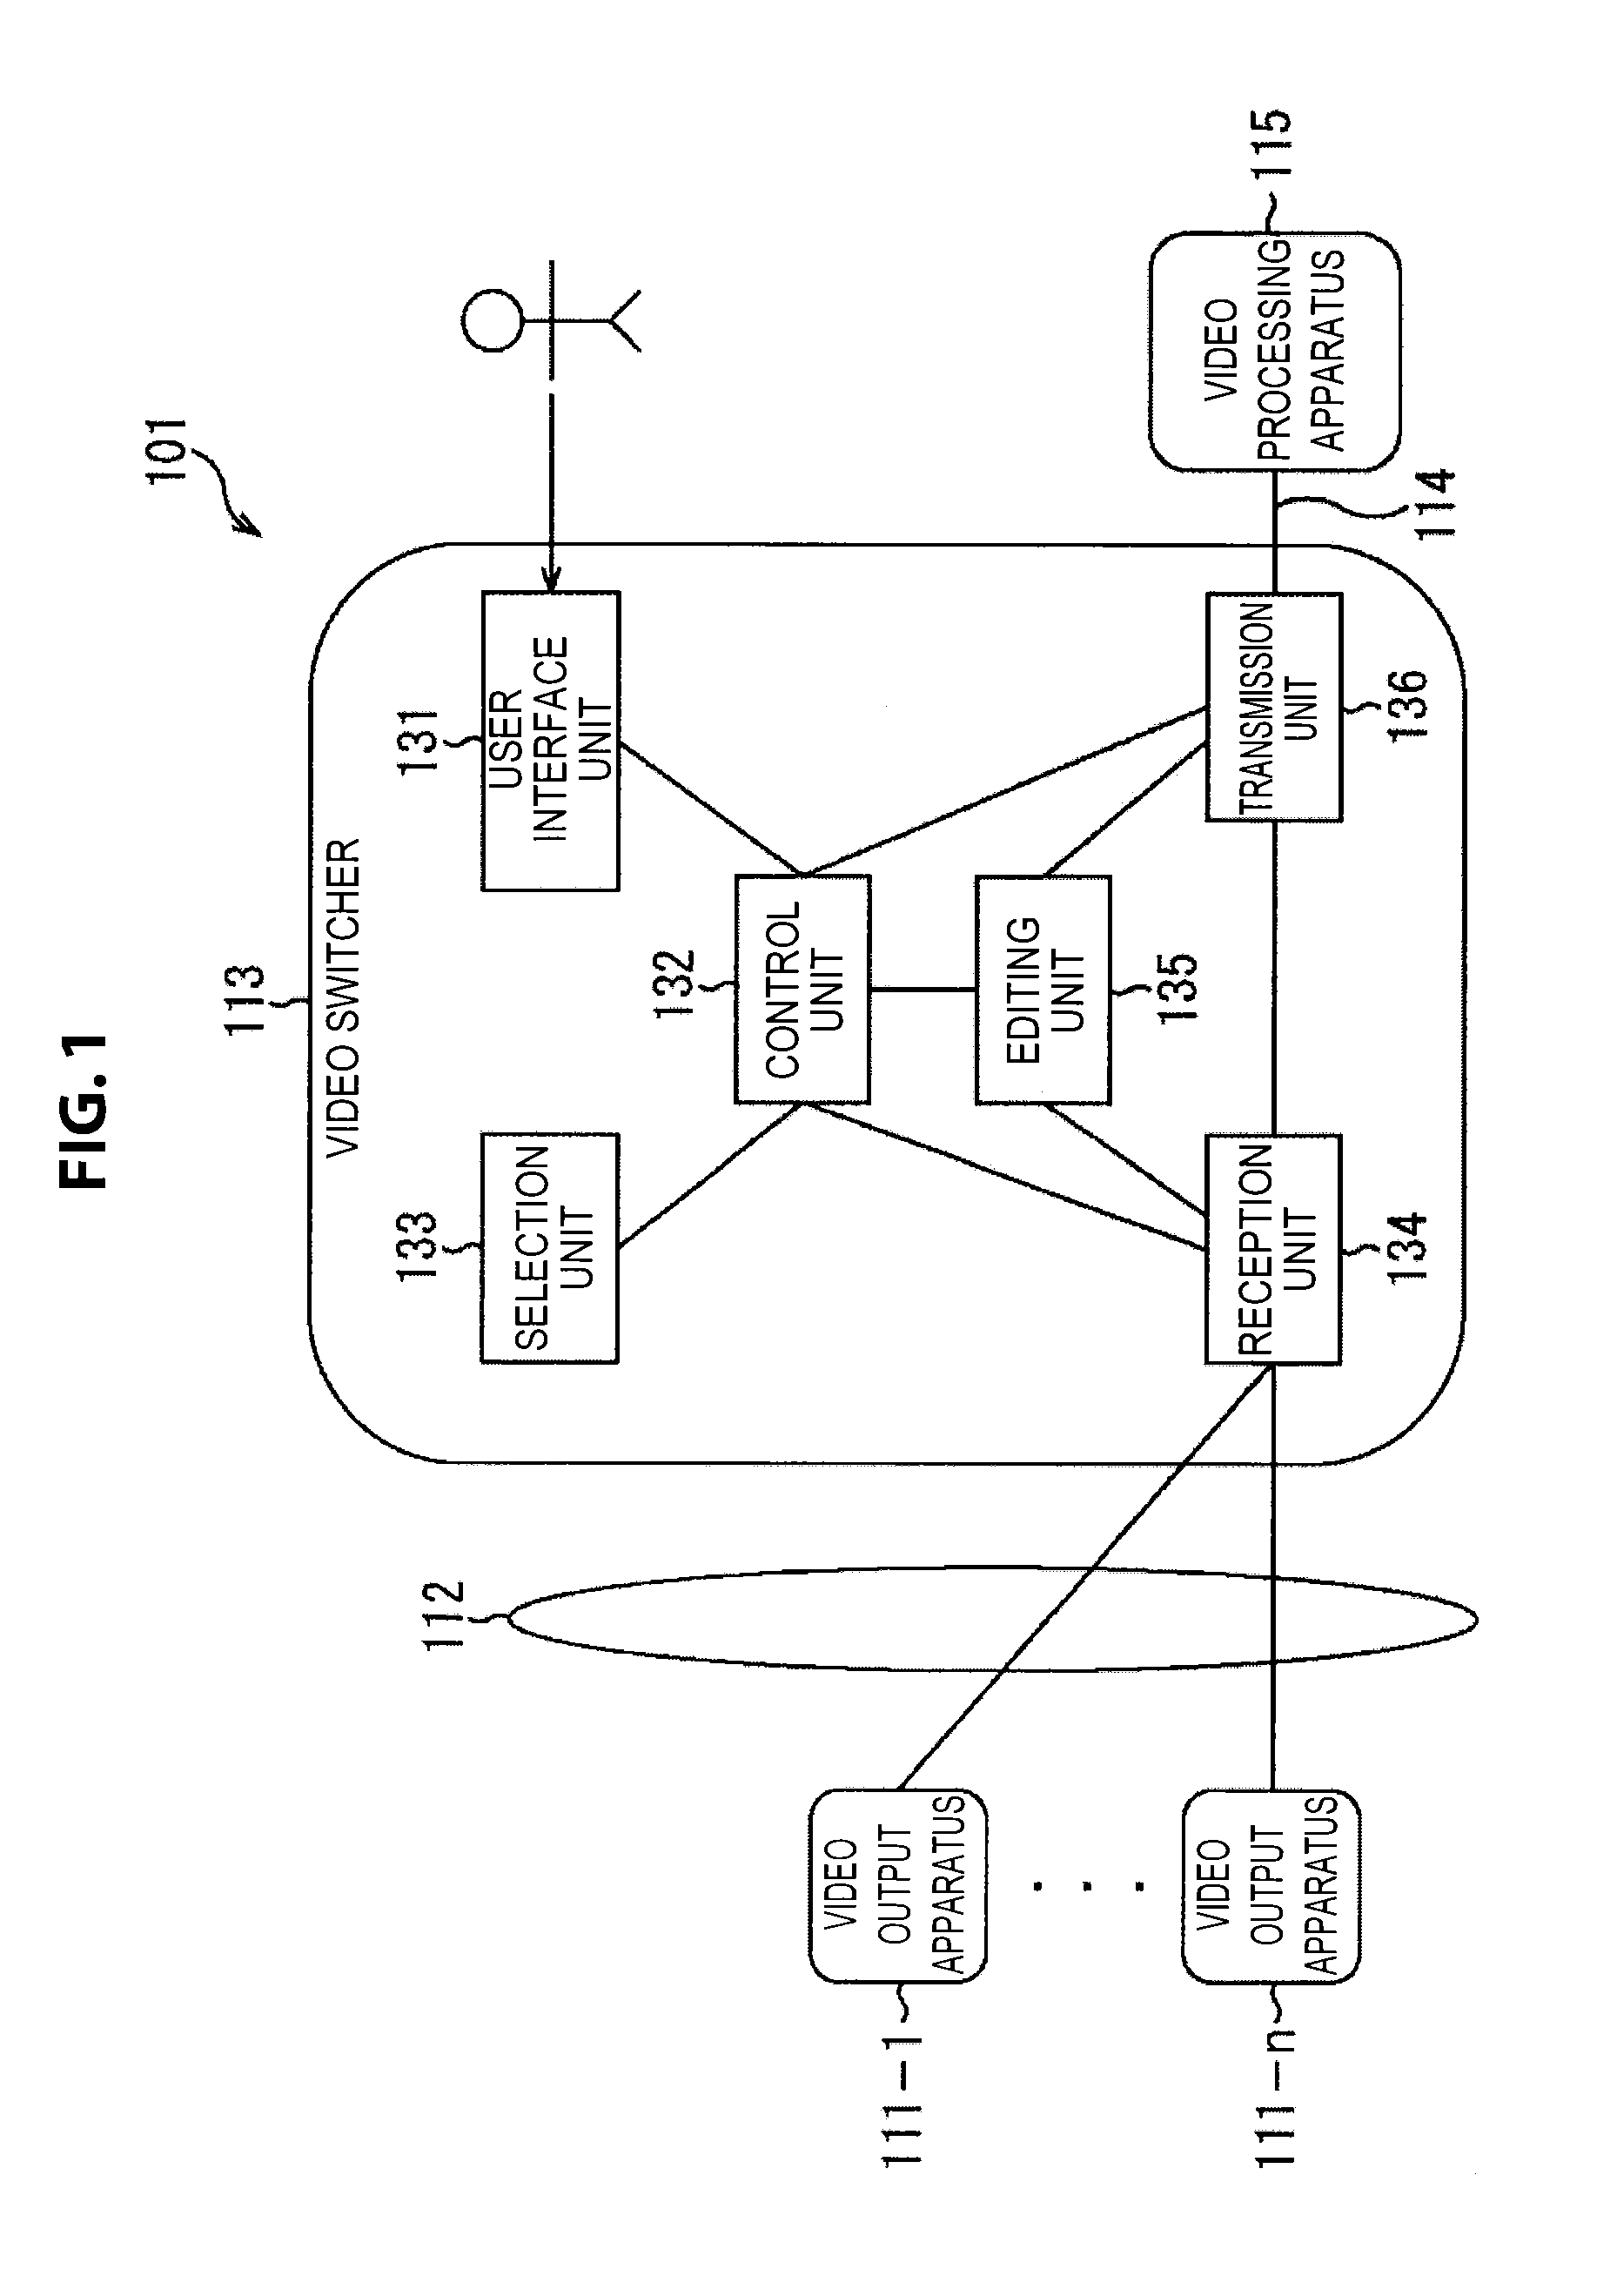 Video switching apparatus, video switching method, program, and information processing apparatus